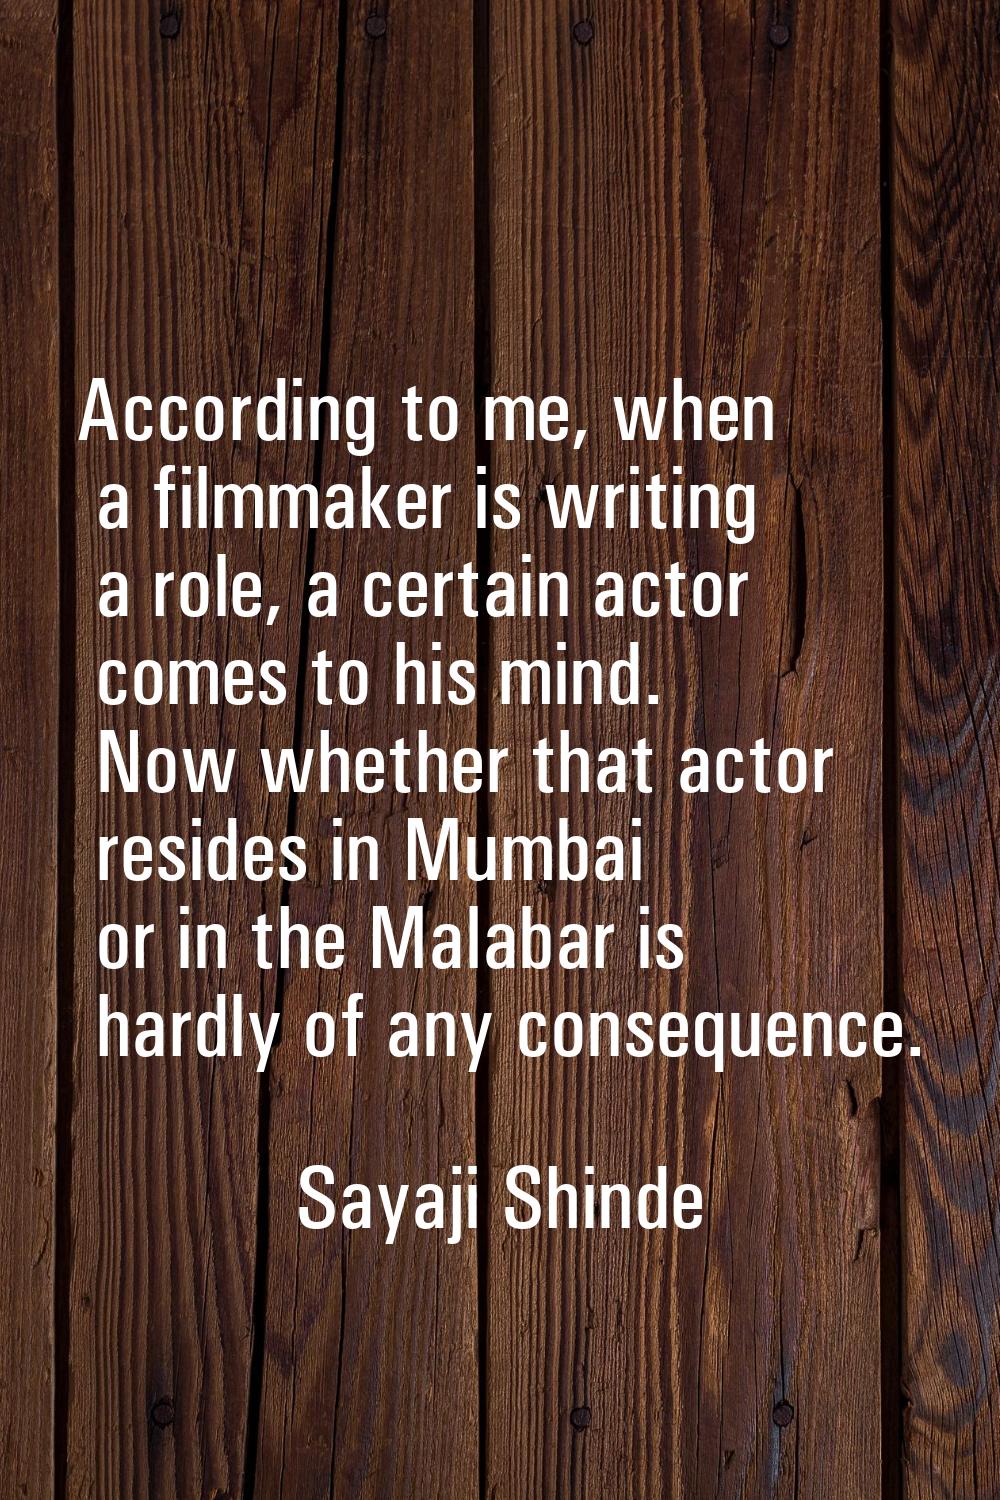 According to me, when a filmmaker is writing a role, a certain actor comes to his mind. Now whether